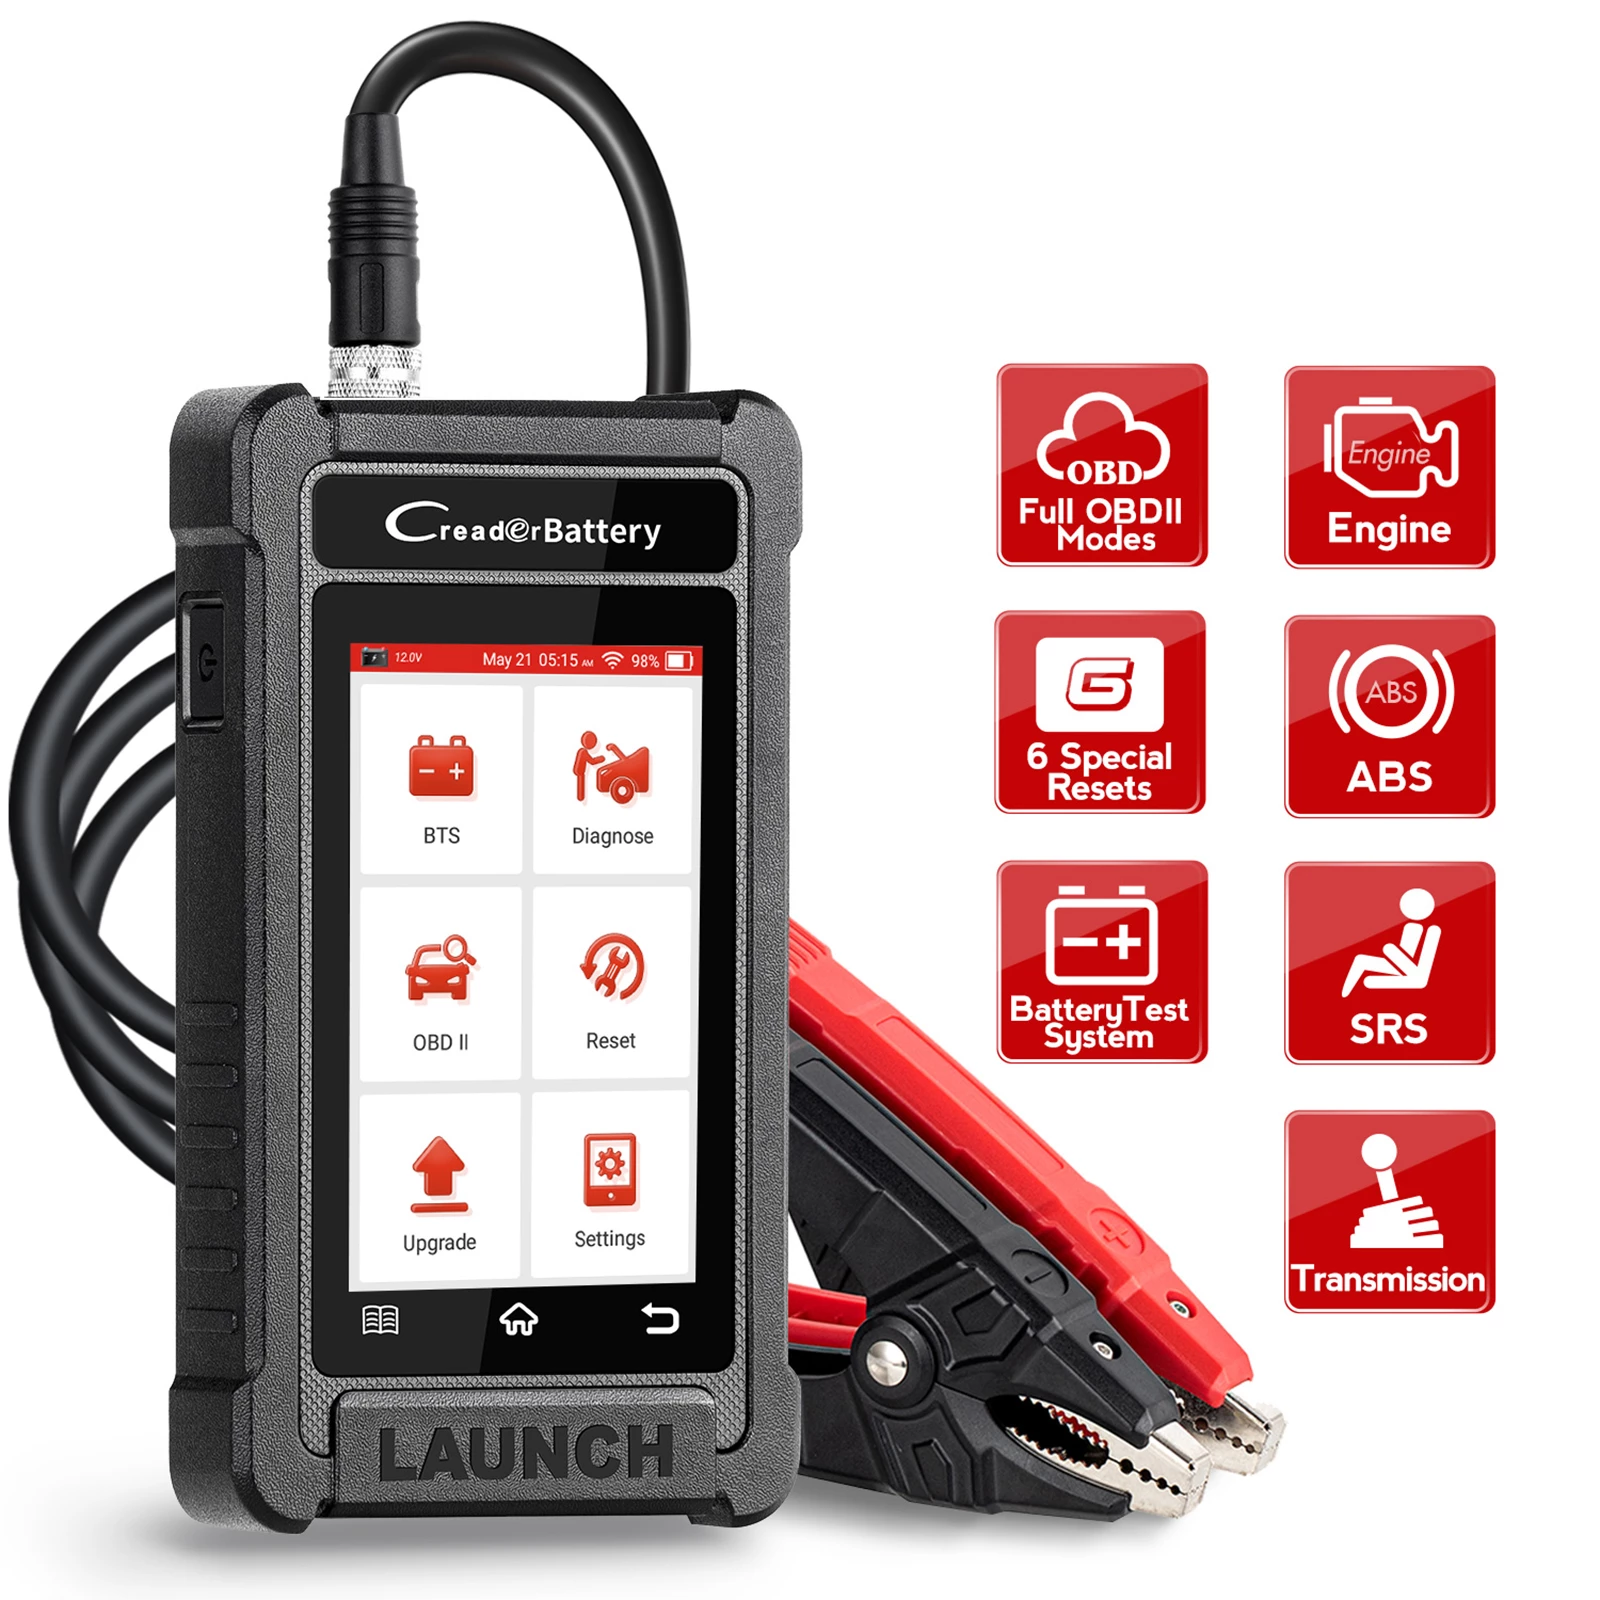 LAUNCH X431 CRB5001 OBD2 12V Car Battery Tester Auto ENG ABS SRS AT Diagnostic Tools OIL BMS TPMS 6 Reset Free Update pk BST360